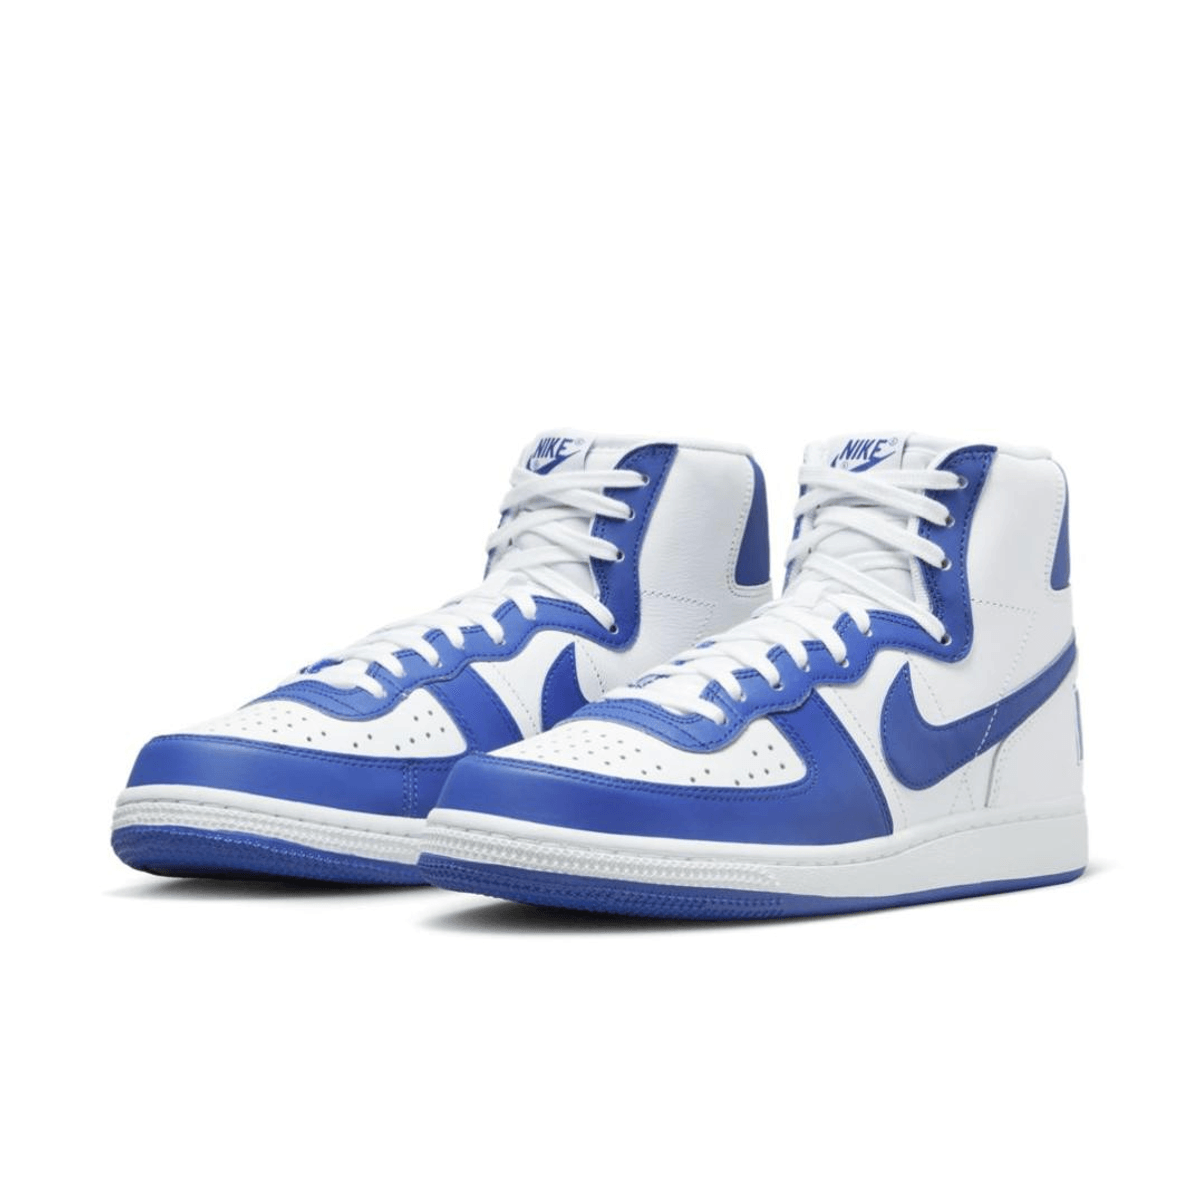 The Nike Terminator High Game Royal Is Scheduled To Arrive In 2023